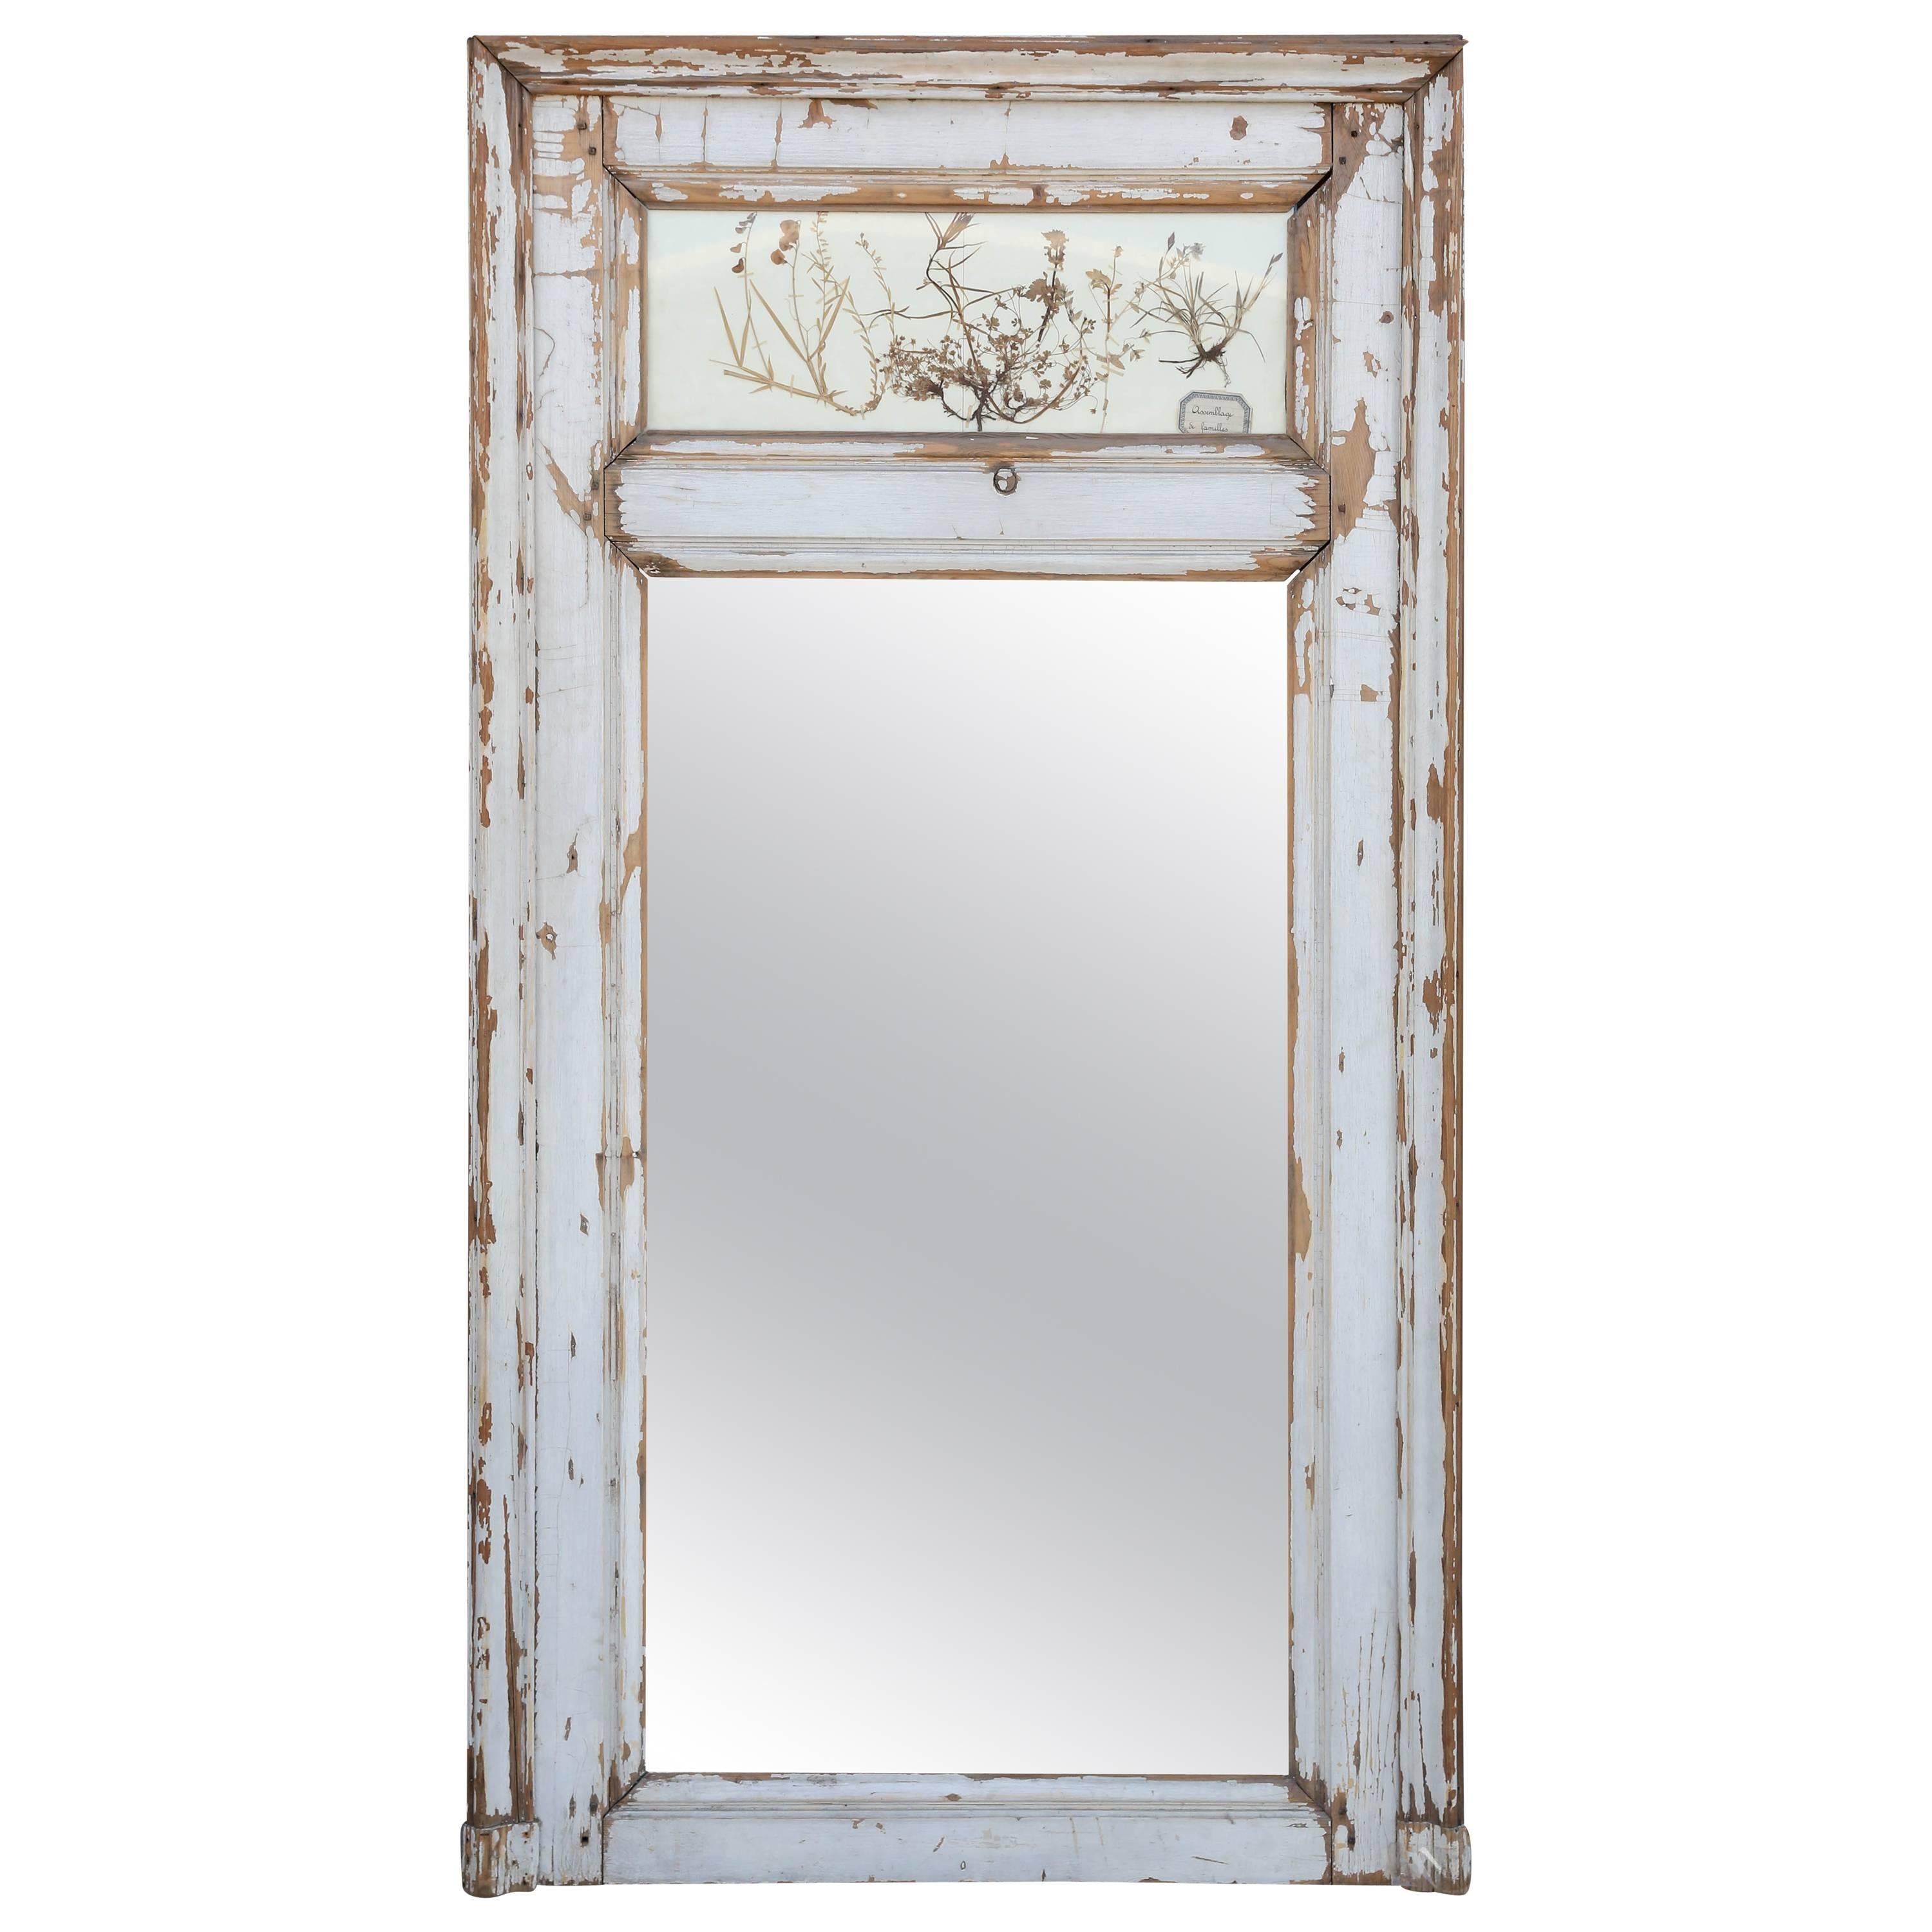 19th Century French Trumeau Mirror with Herbs